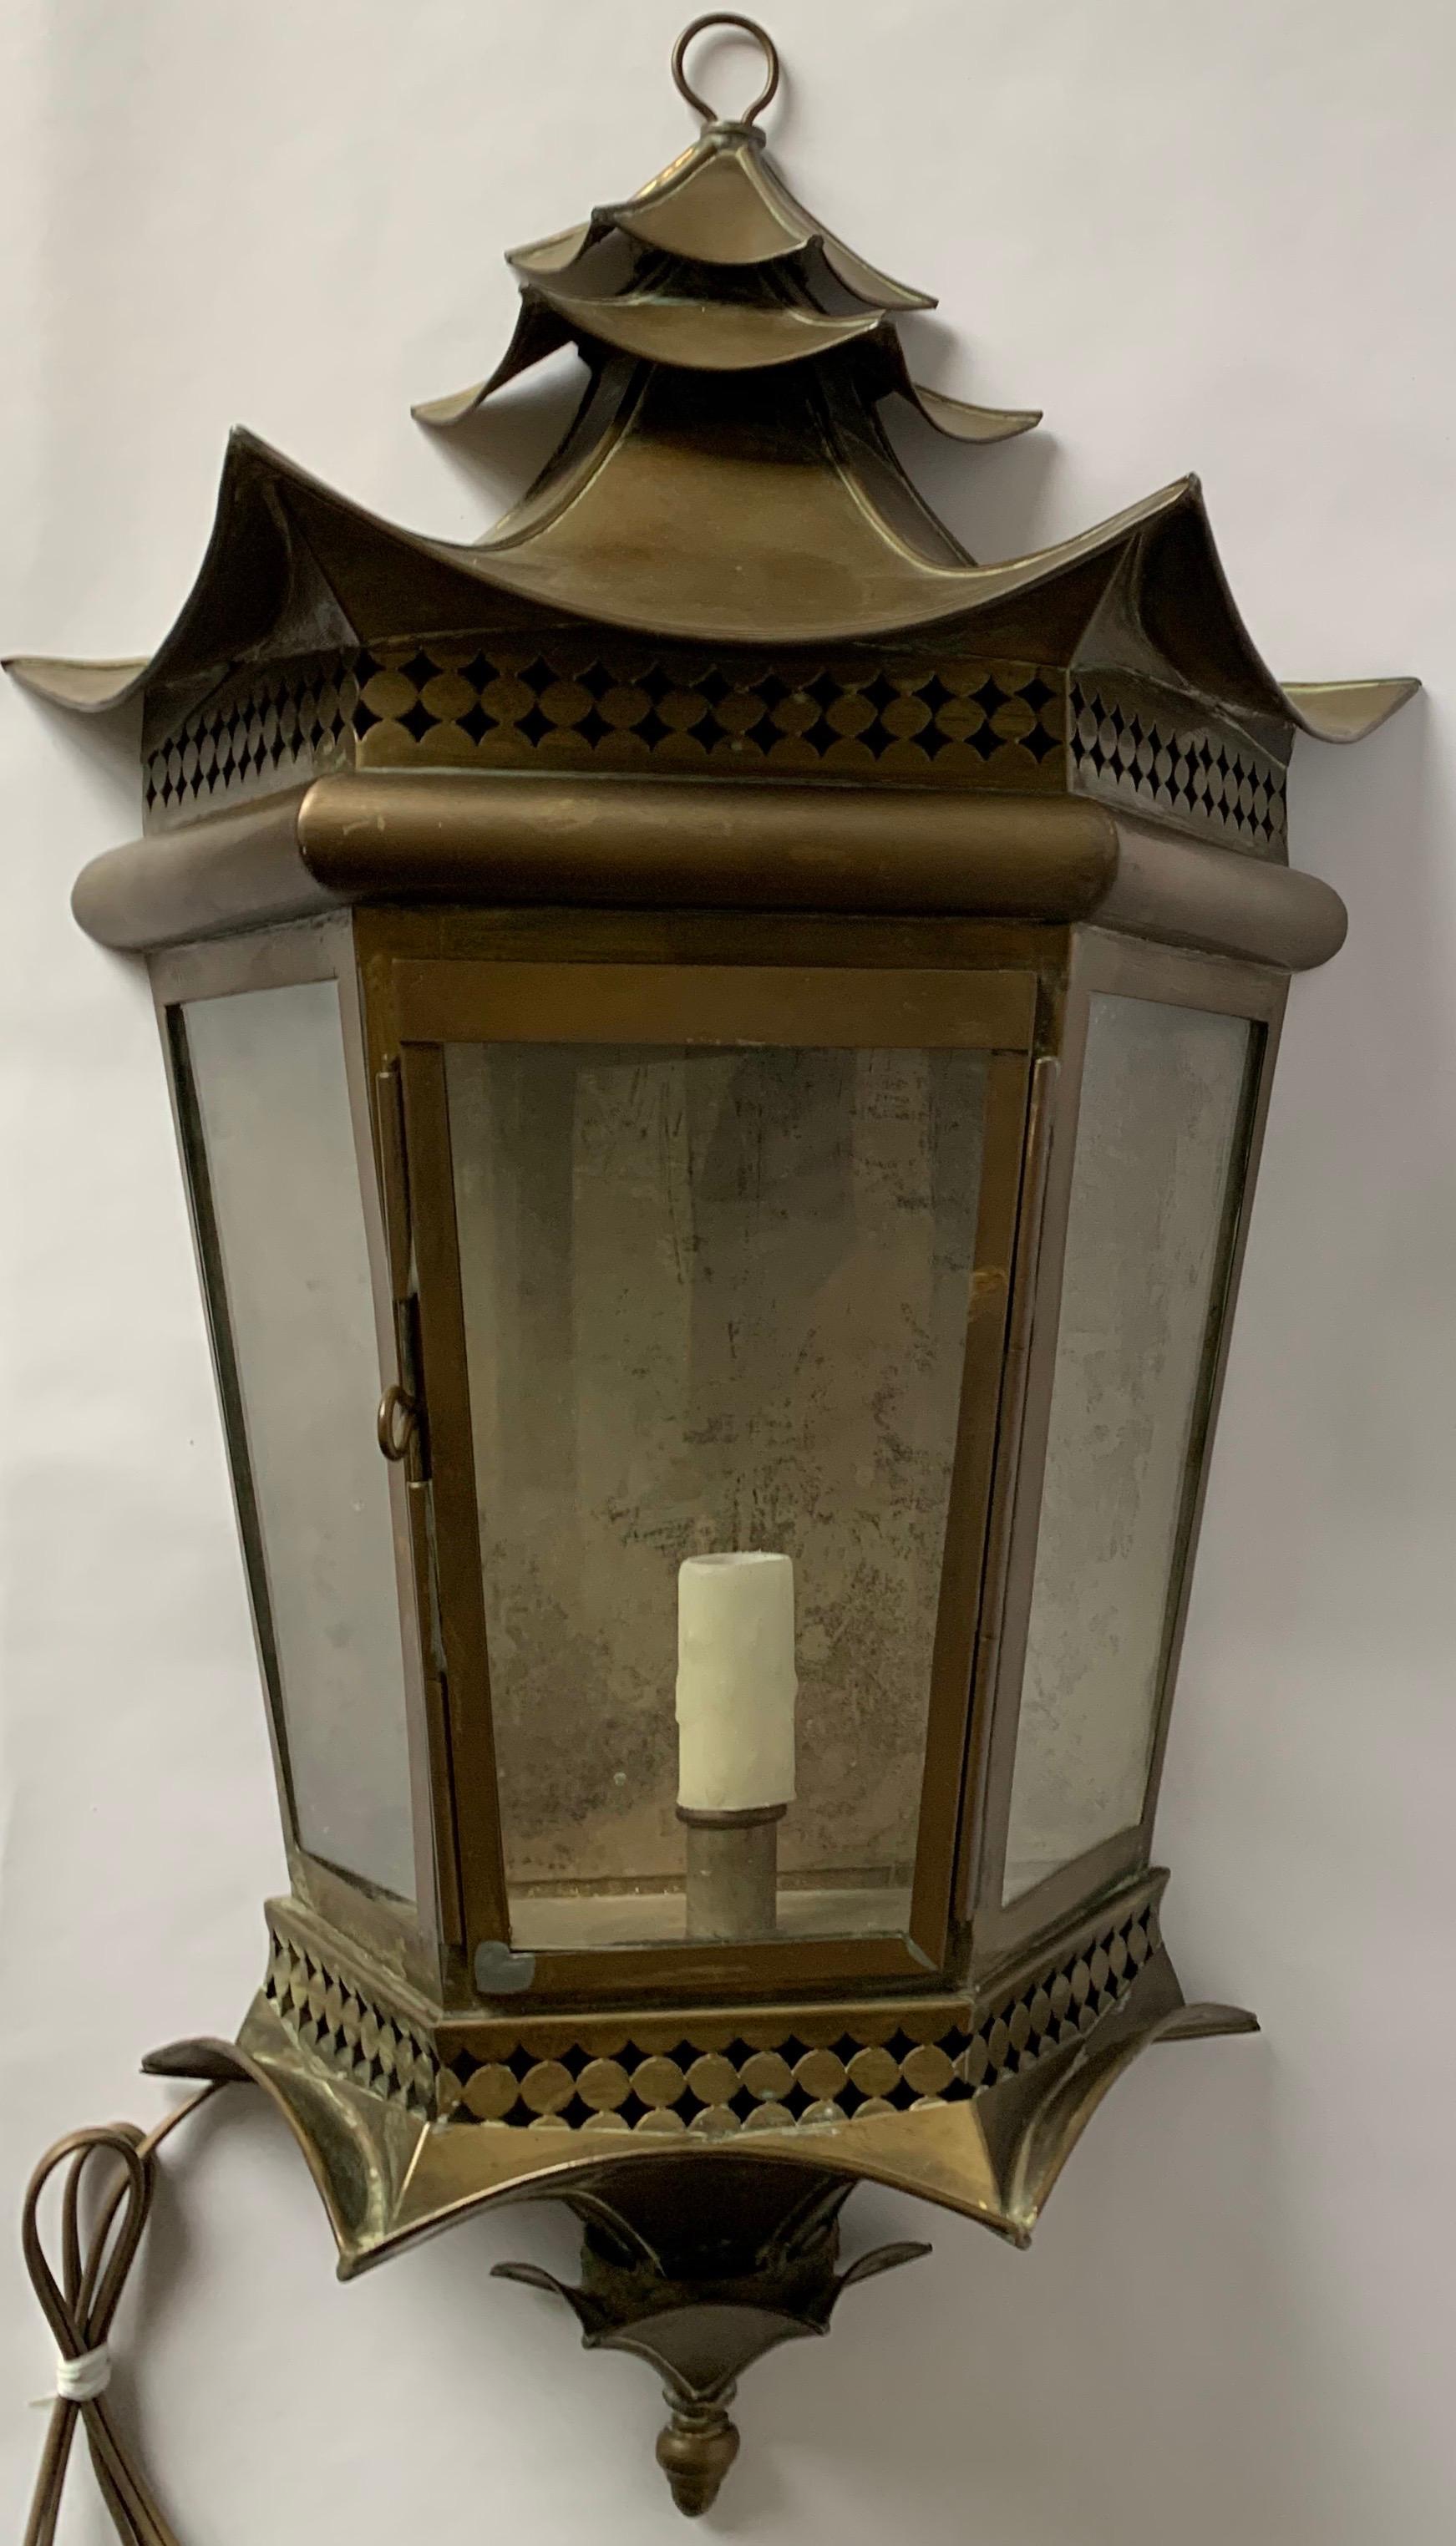 1960s Italian brass pagoda sconce. Clear glass panels. Backed in unpainted tin (as shown). Suitable for indoor or covered outdoor areas. Takes one chandelier bulb (not included). Newly rewired.

Please note that additional components such as back